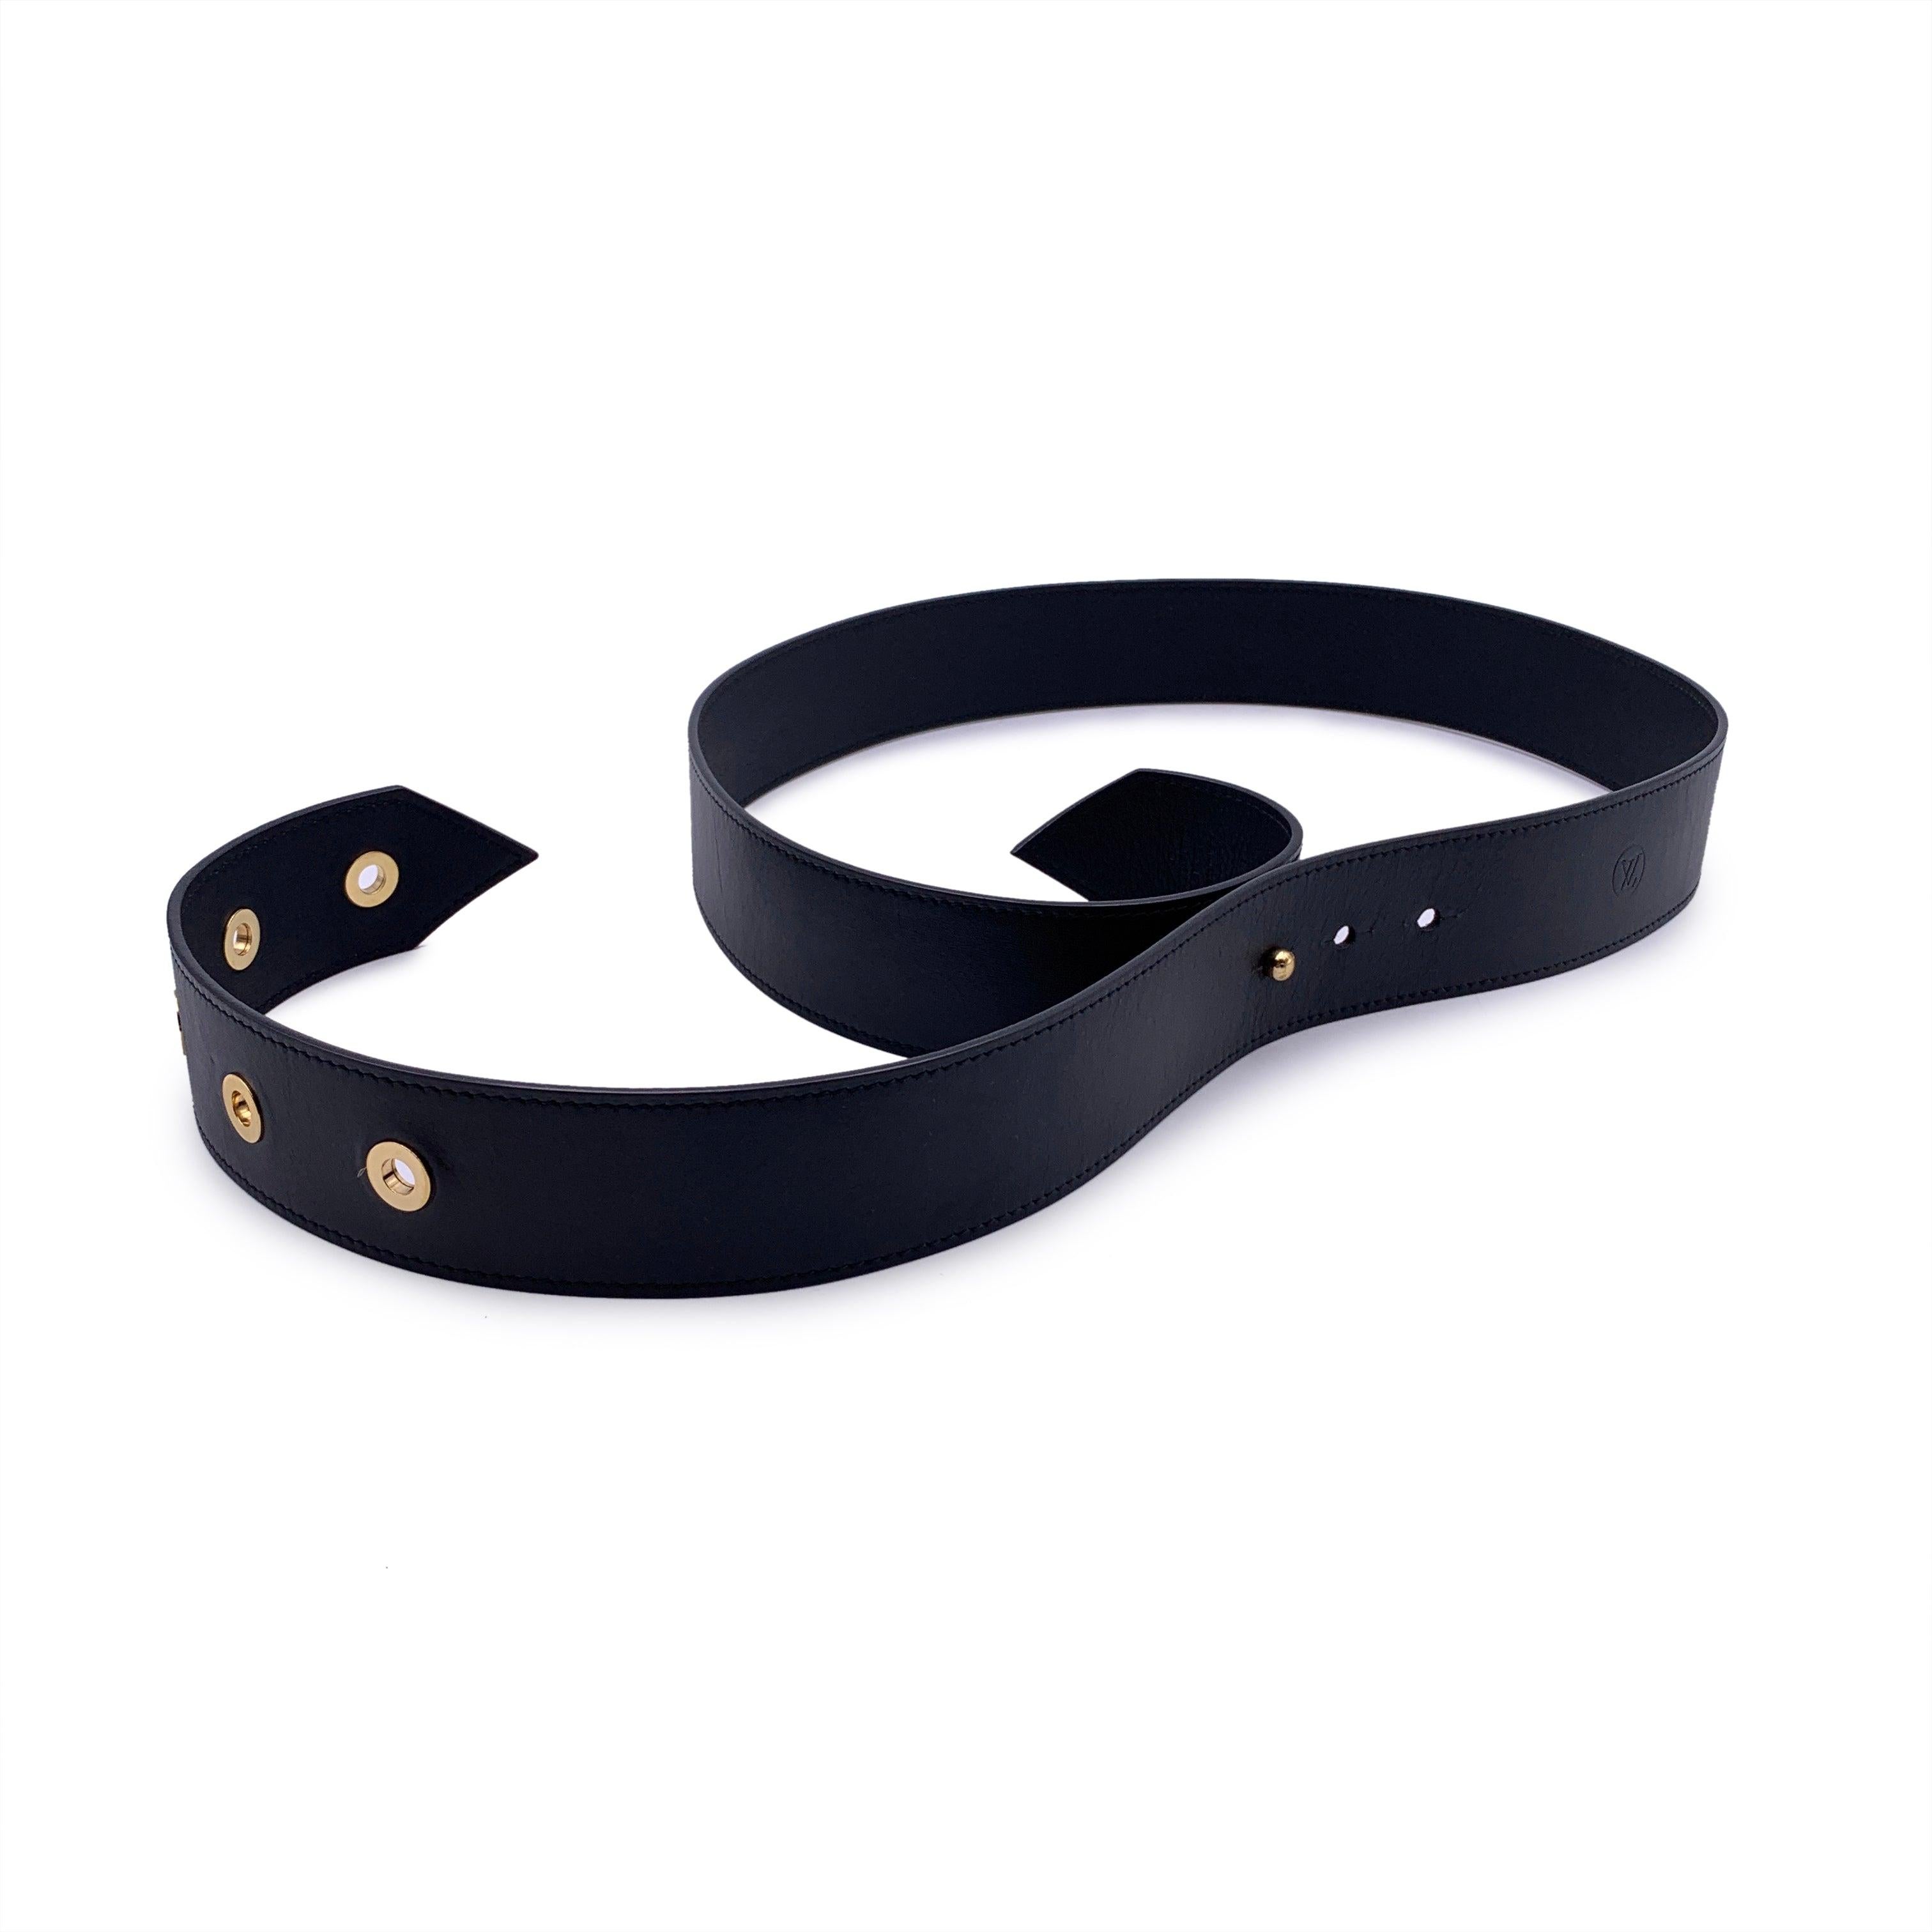 This beautiful belt will come with a Certificate of Authenticity provided by Entrupy. The certificate will be provided at no further cost. Louis Vuitton Tie the Knot Black Leather Eyelet Belt. From the Fall 2014 collection. Crafted in black leather